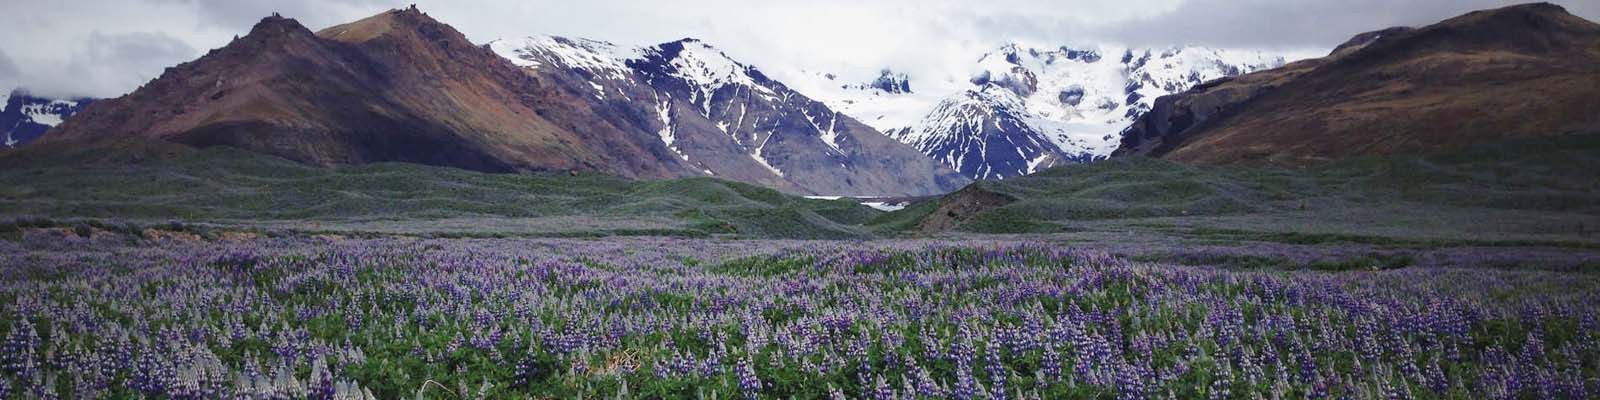 Snow-capped mountains behind a field of lavendar